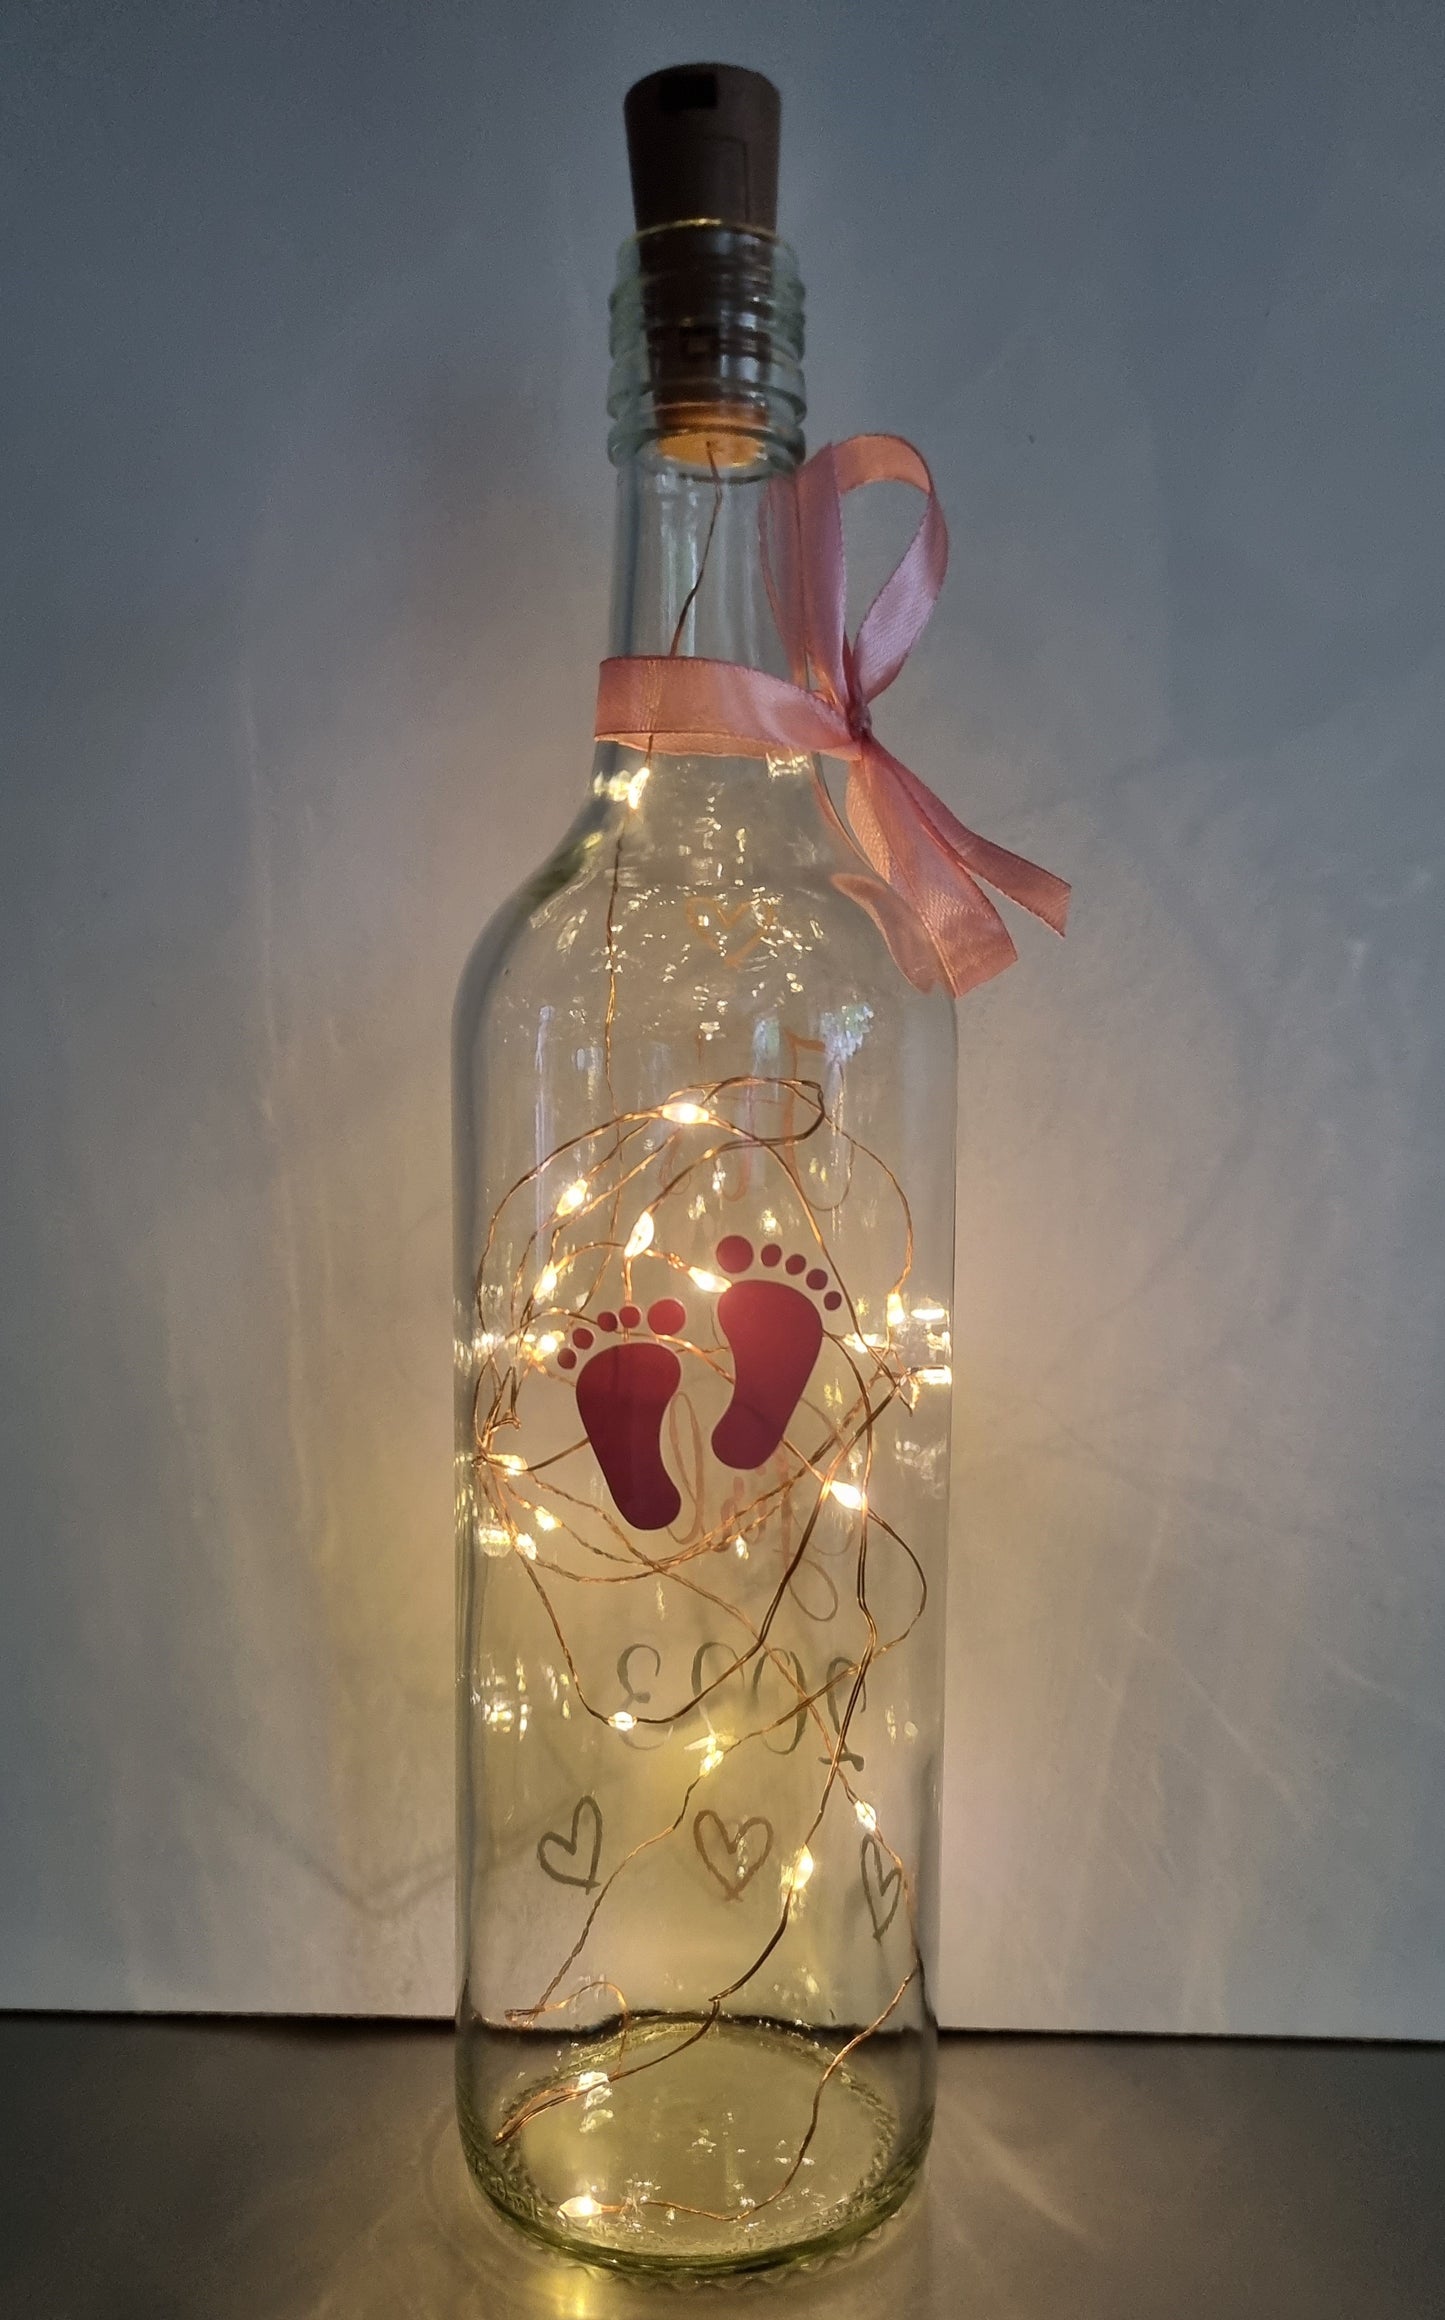 "It's a Girl " Light Up Bottle/New Baby/Gift For New Parents.